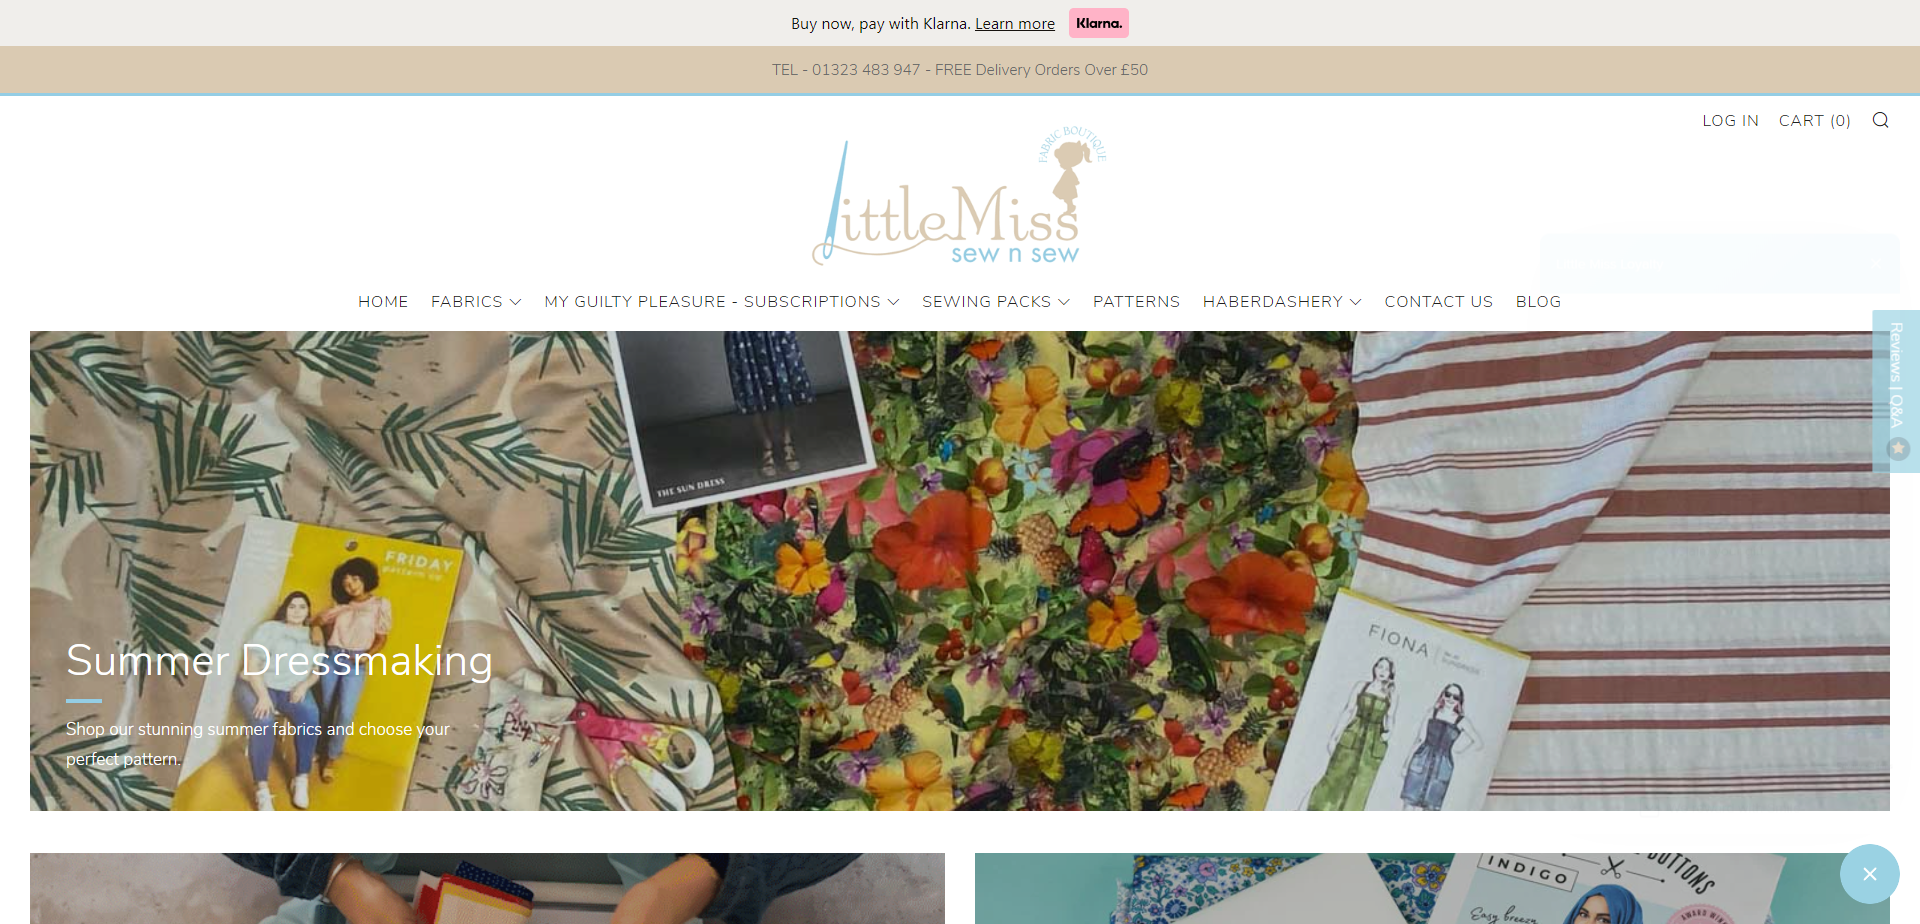 Landing Page for Little Miss Sew n Sew